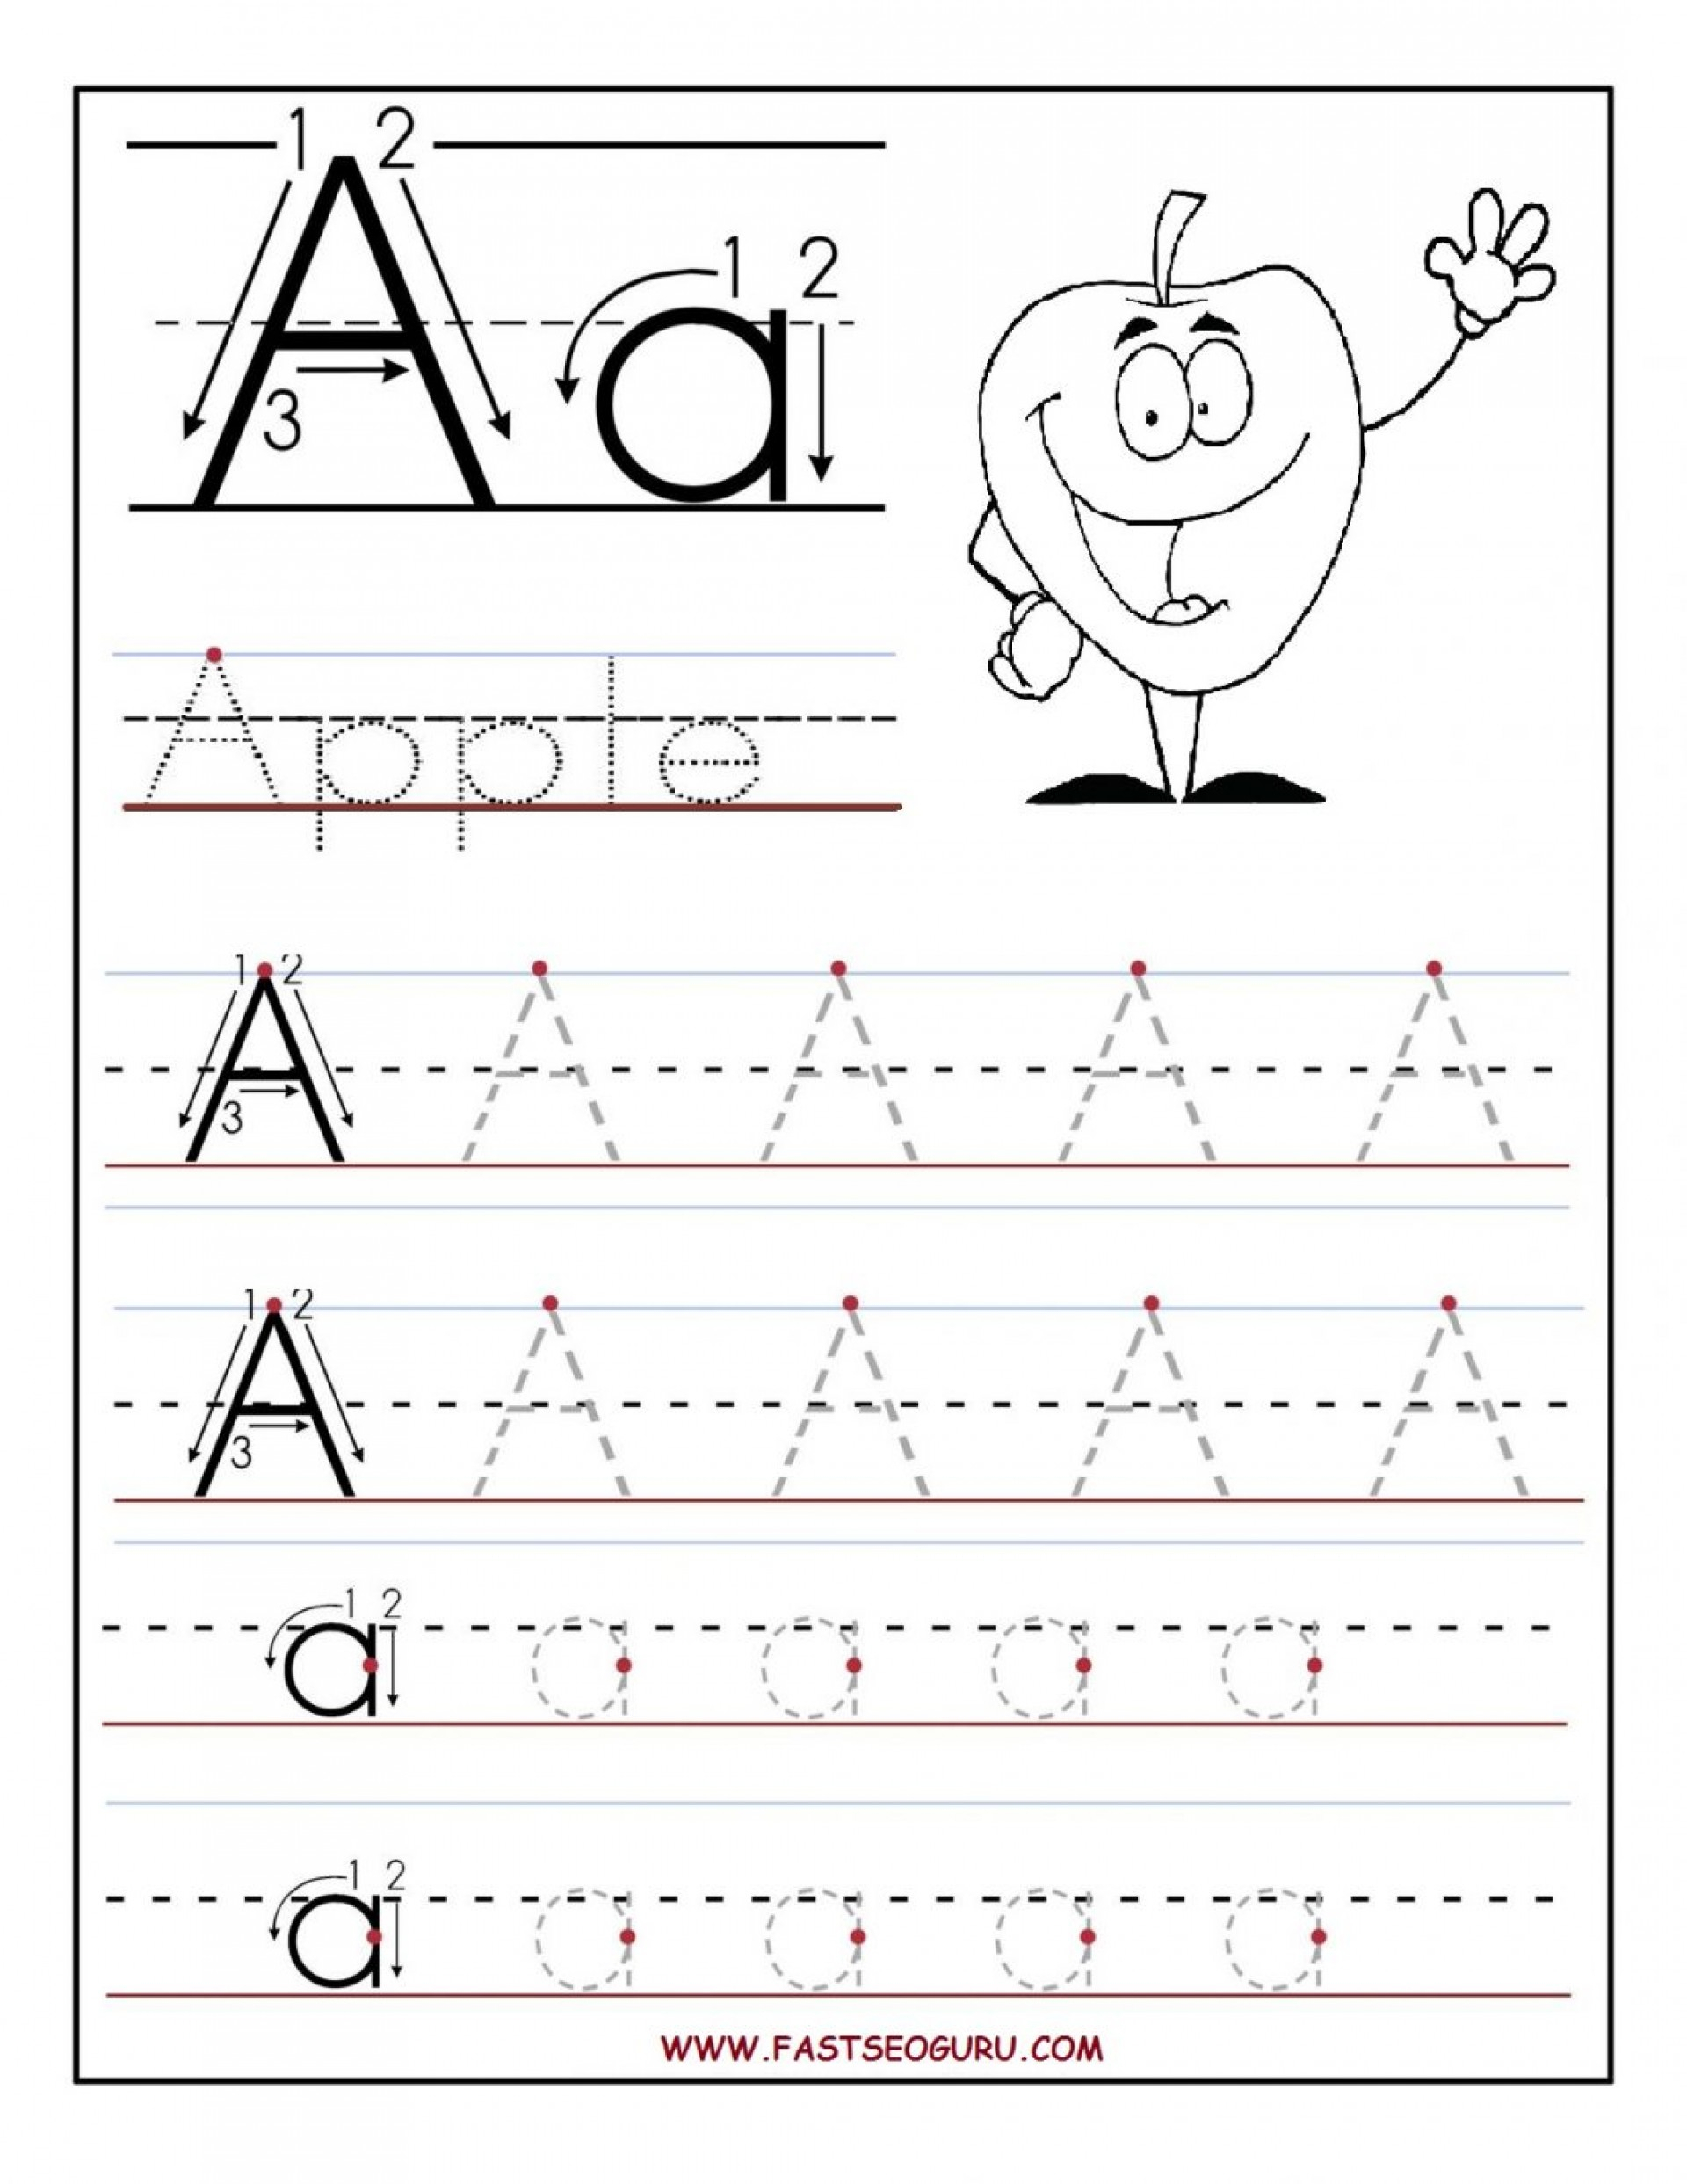 Coloring Book : Free Printable Tracingts For Kindergarten inside Tracing Letters For Kindergarten